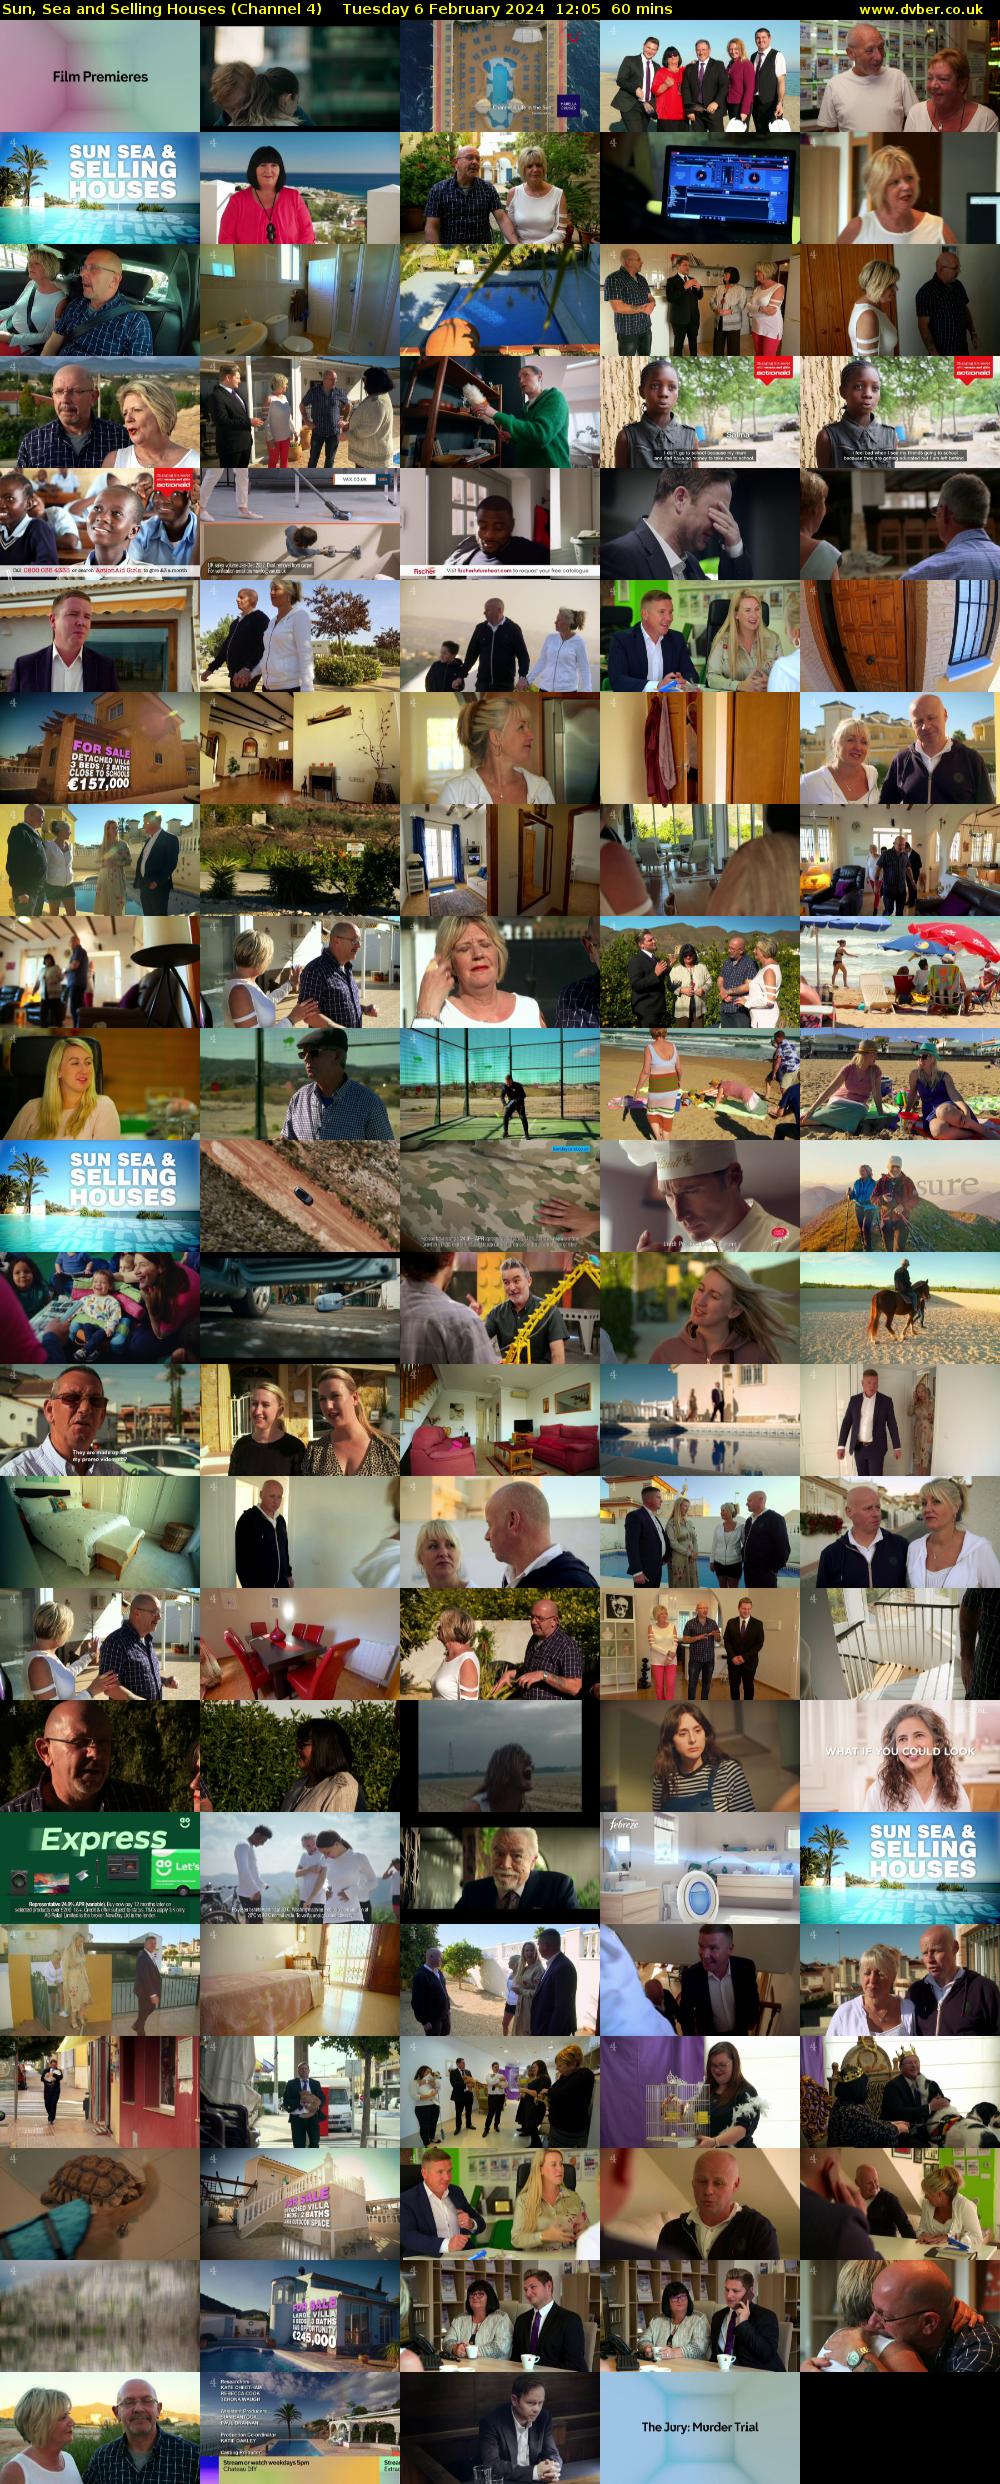 Sun, Sea and Selling Houses (Channel 4) Tuesday 6 February 2024 12:05 - 13:05